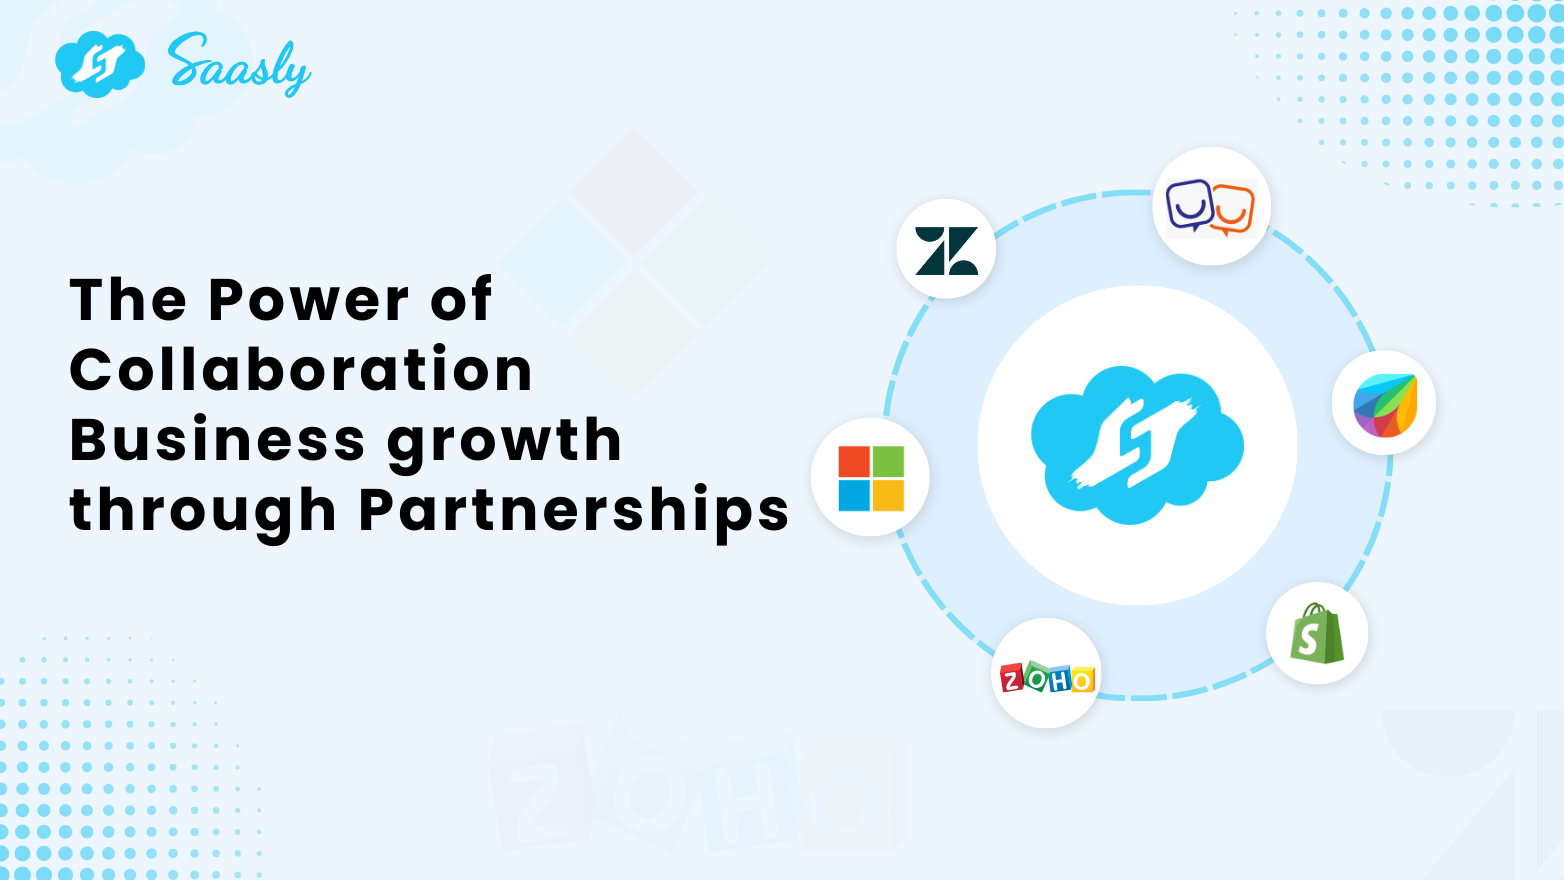 The Power of Collaboration: Business growth through Partnerships